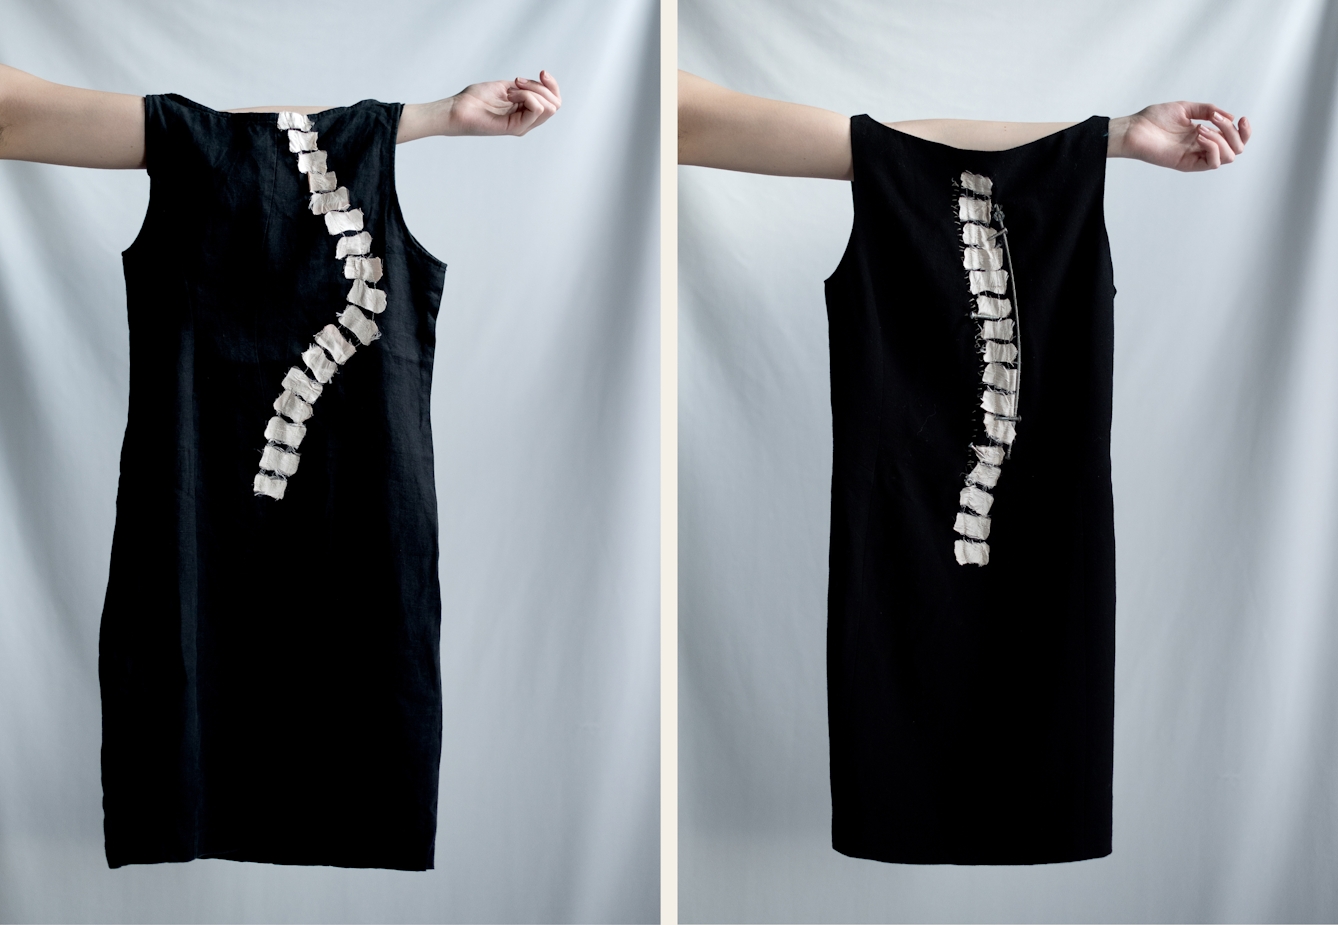 Photographic diptych. Both images show an arm held out horizontally, appearing into the frame from the left. Hung off each arm is a black dress. The image on the left has the white vertebrae of a spine stitched into the black cloth in curved shape representative of the condition, scoliosis. The image on the right has the white vertebrae of a spine stitched into the black cloth in a straight, near vertical line.